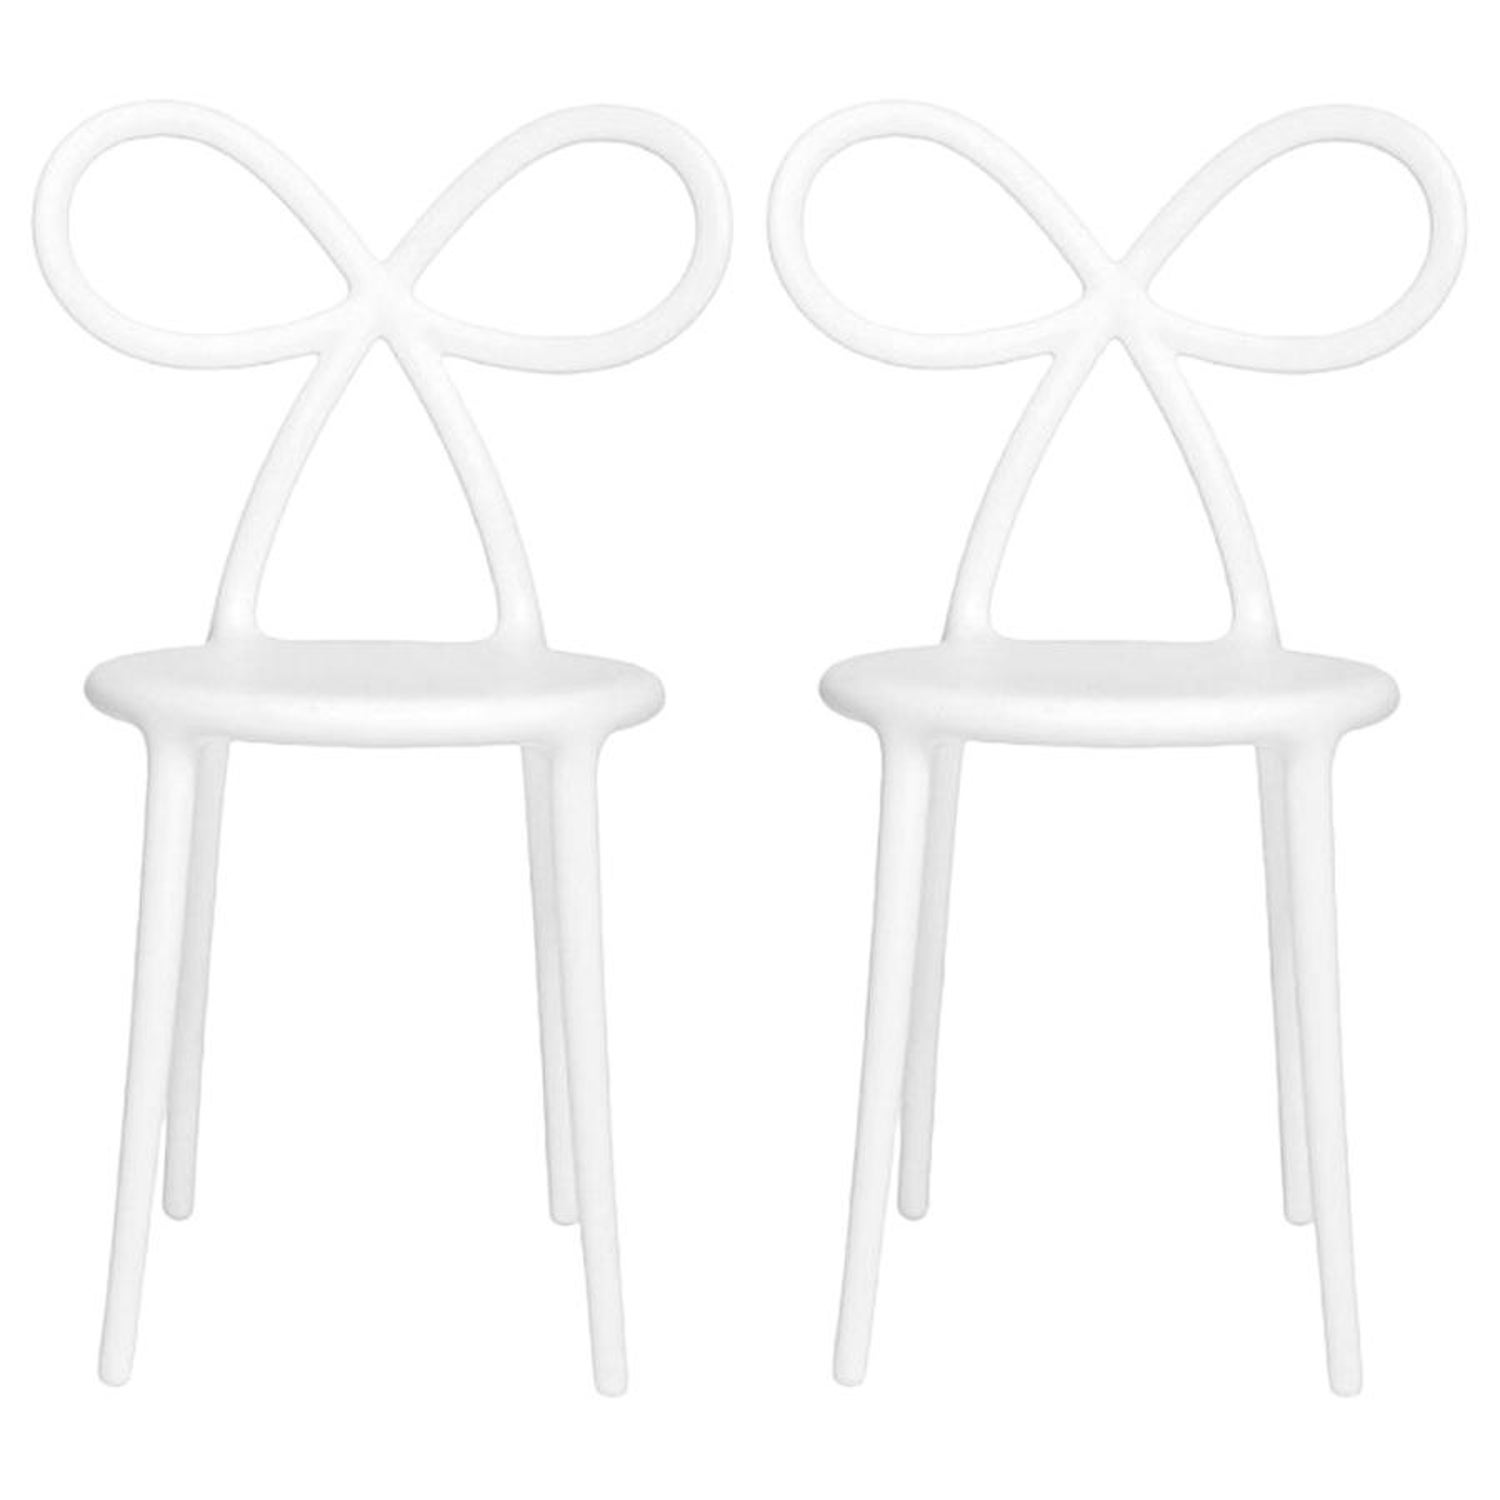 Set of 4 White Ribbon Chairs, Designed by Nika Zupanc, Made in Italy For  Sale at 1stDibs